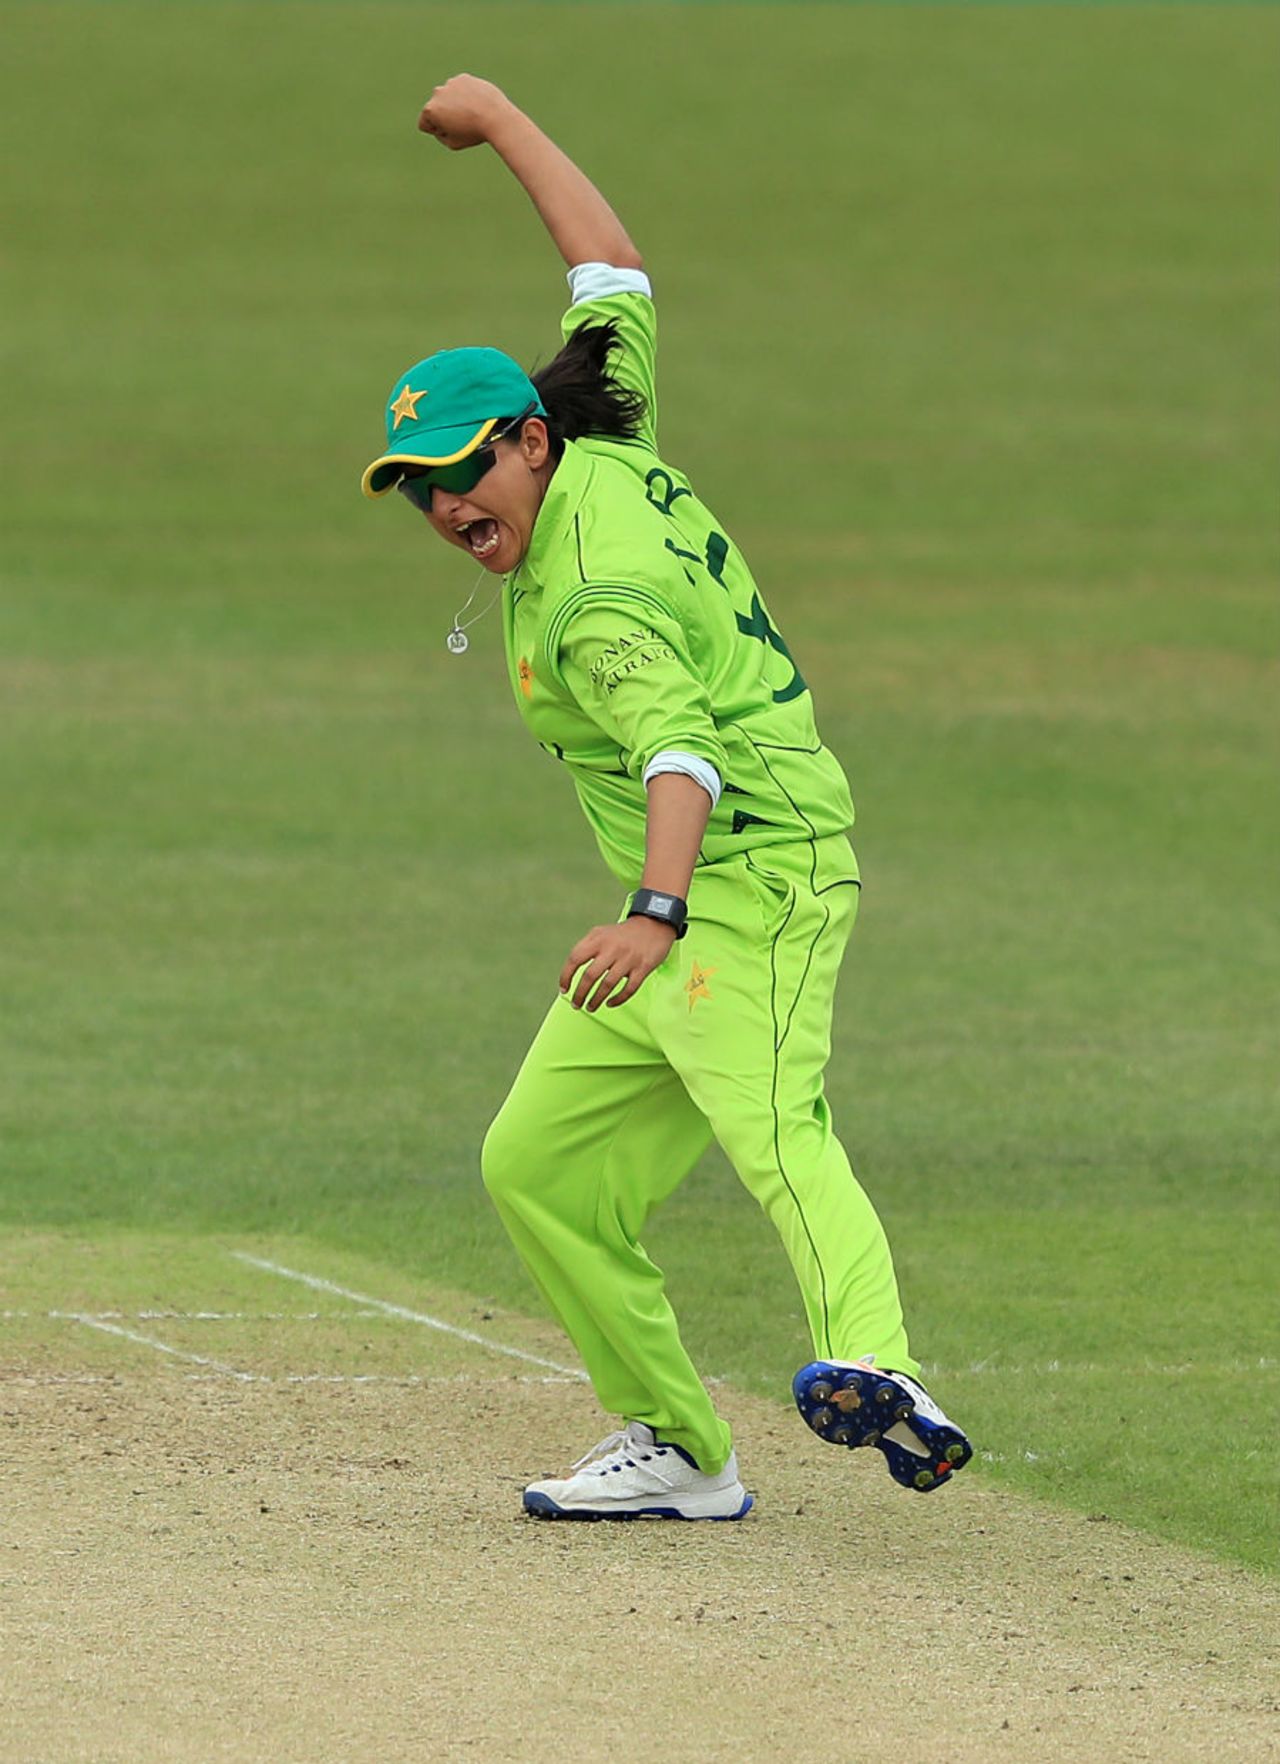 Sana Mir celebrates a wicket, South Africa v Pakistan, Women's World Cup, Leicester, June 25, 2017